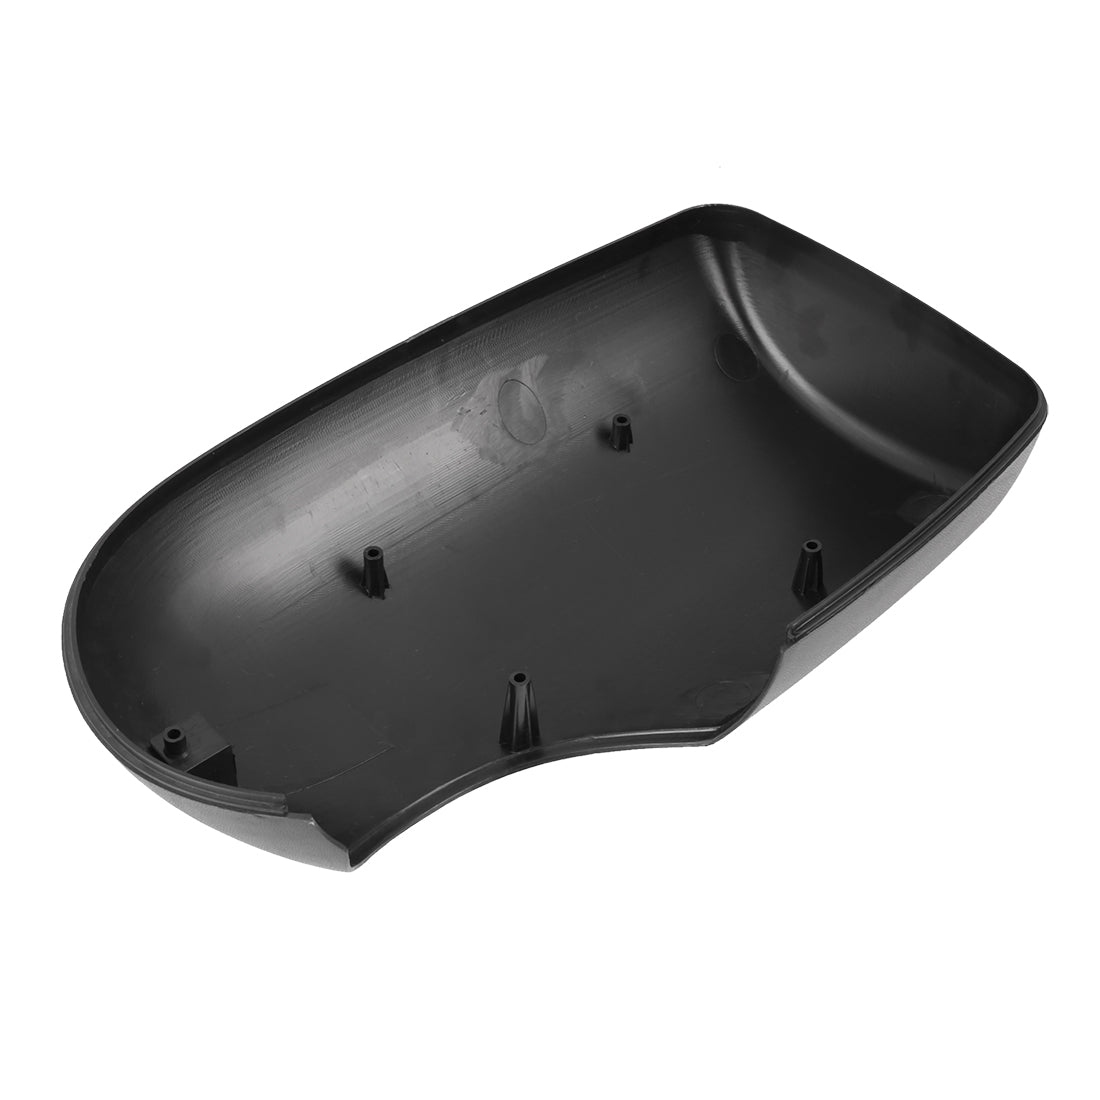 X AUTOHAUX Car Left Side Wing Door Mirror Cover Black Plastic Mirror Cap for Ford Transit MK6 MK7 2000-2014